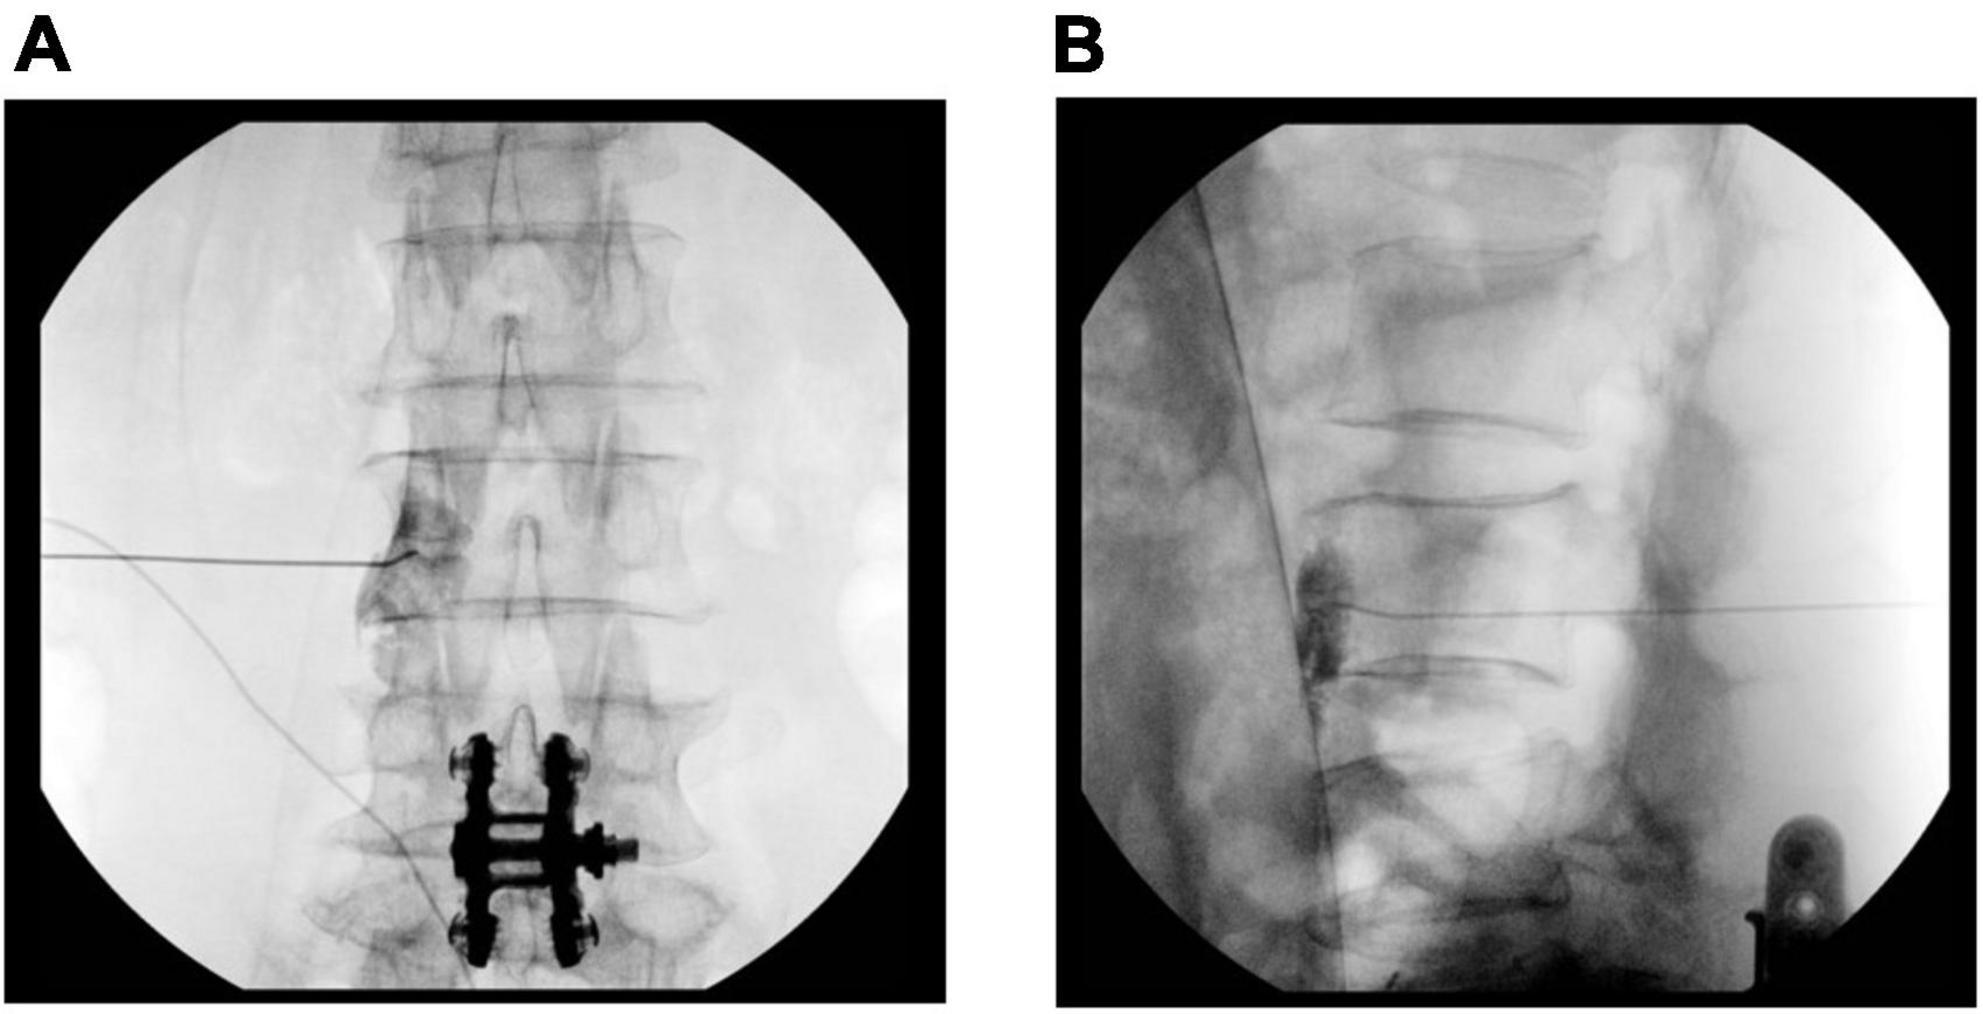 The analgesic effect of lumbar sympathetic ganglion block in patients with failed back surgery syndrome